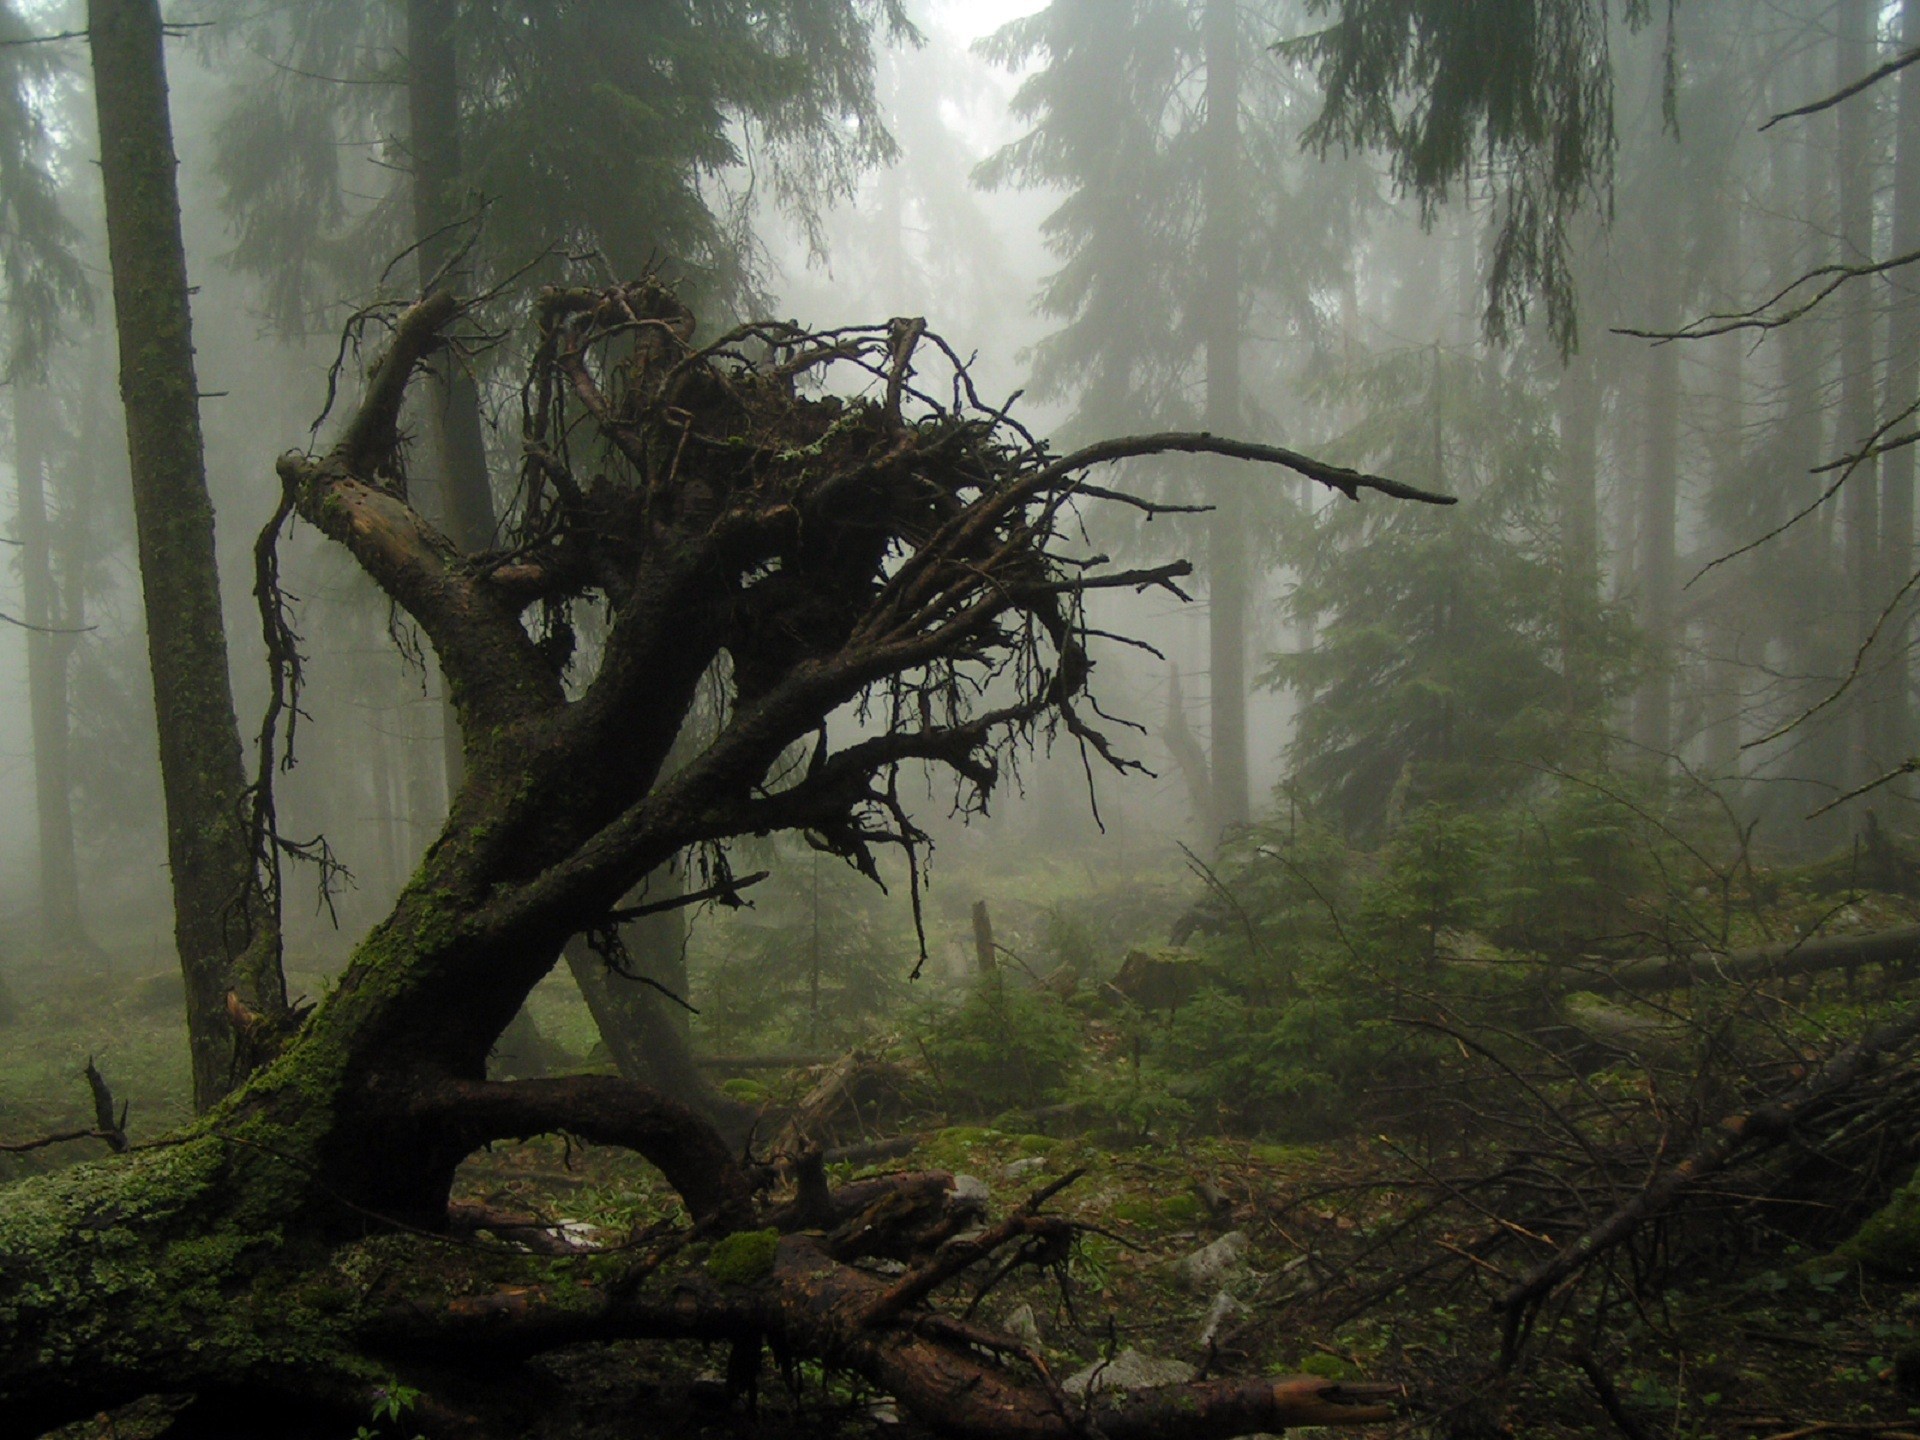 Nature___Forest___The_roots_of_a_fallen_tree_053460_.jpg